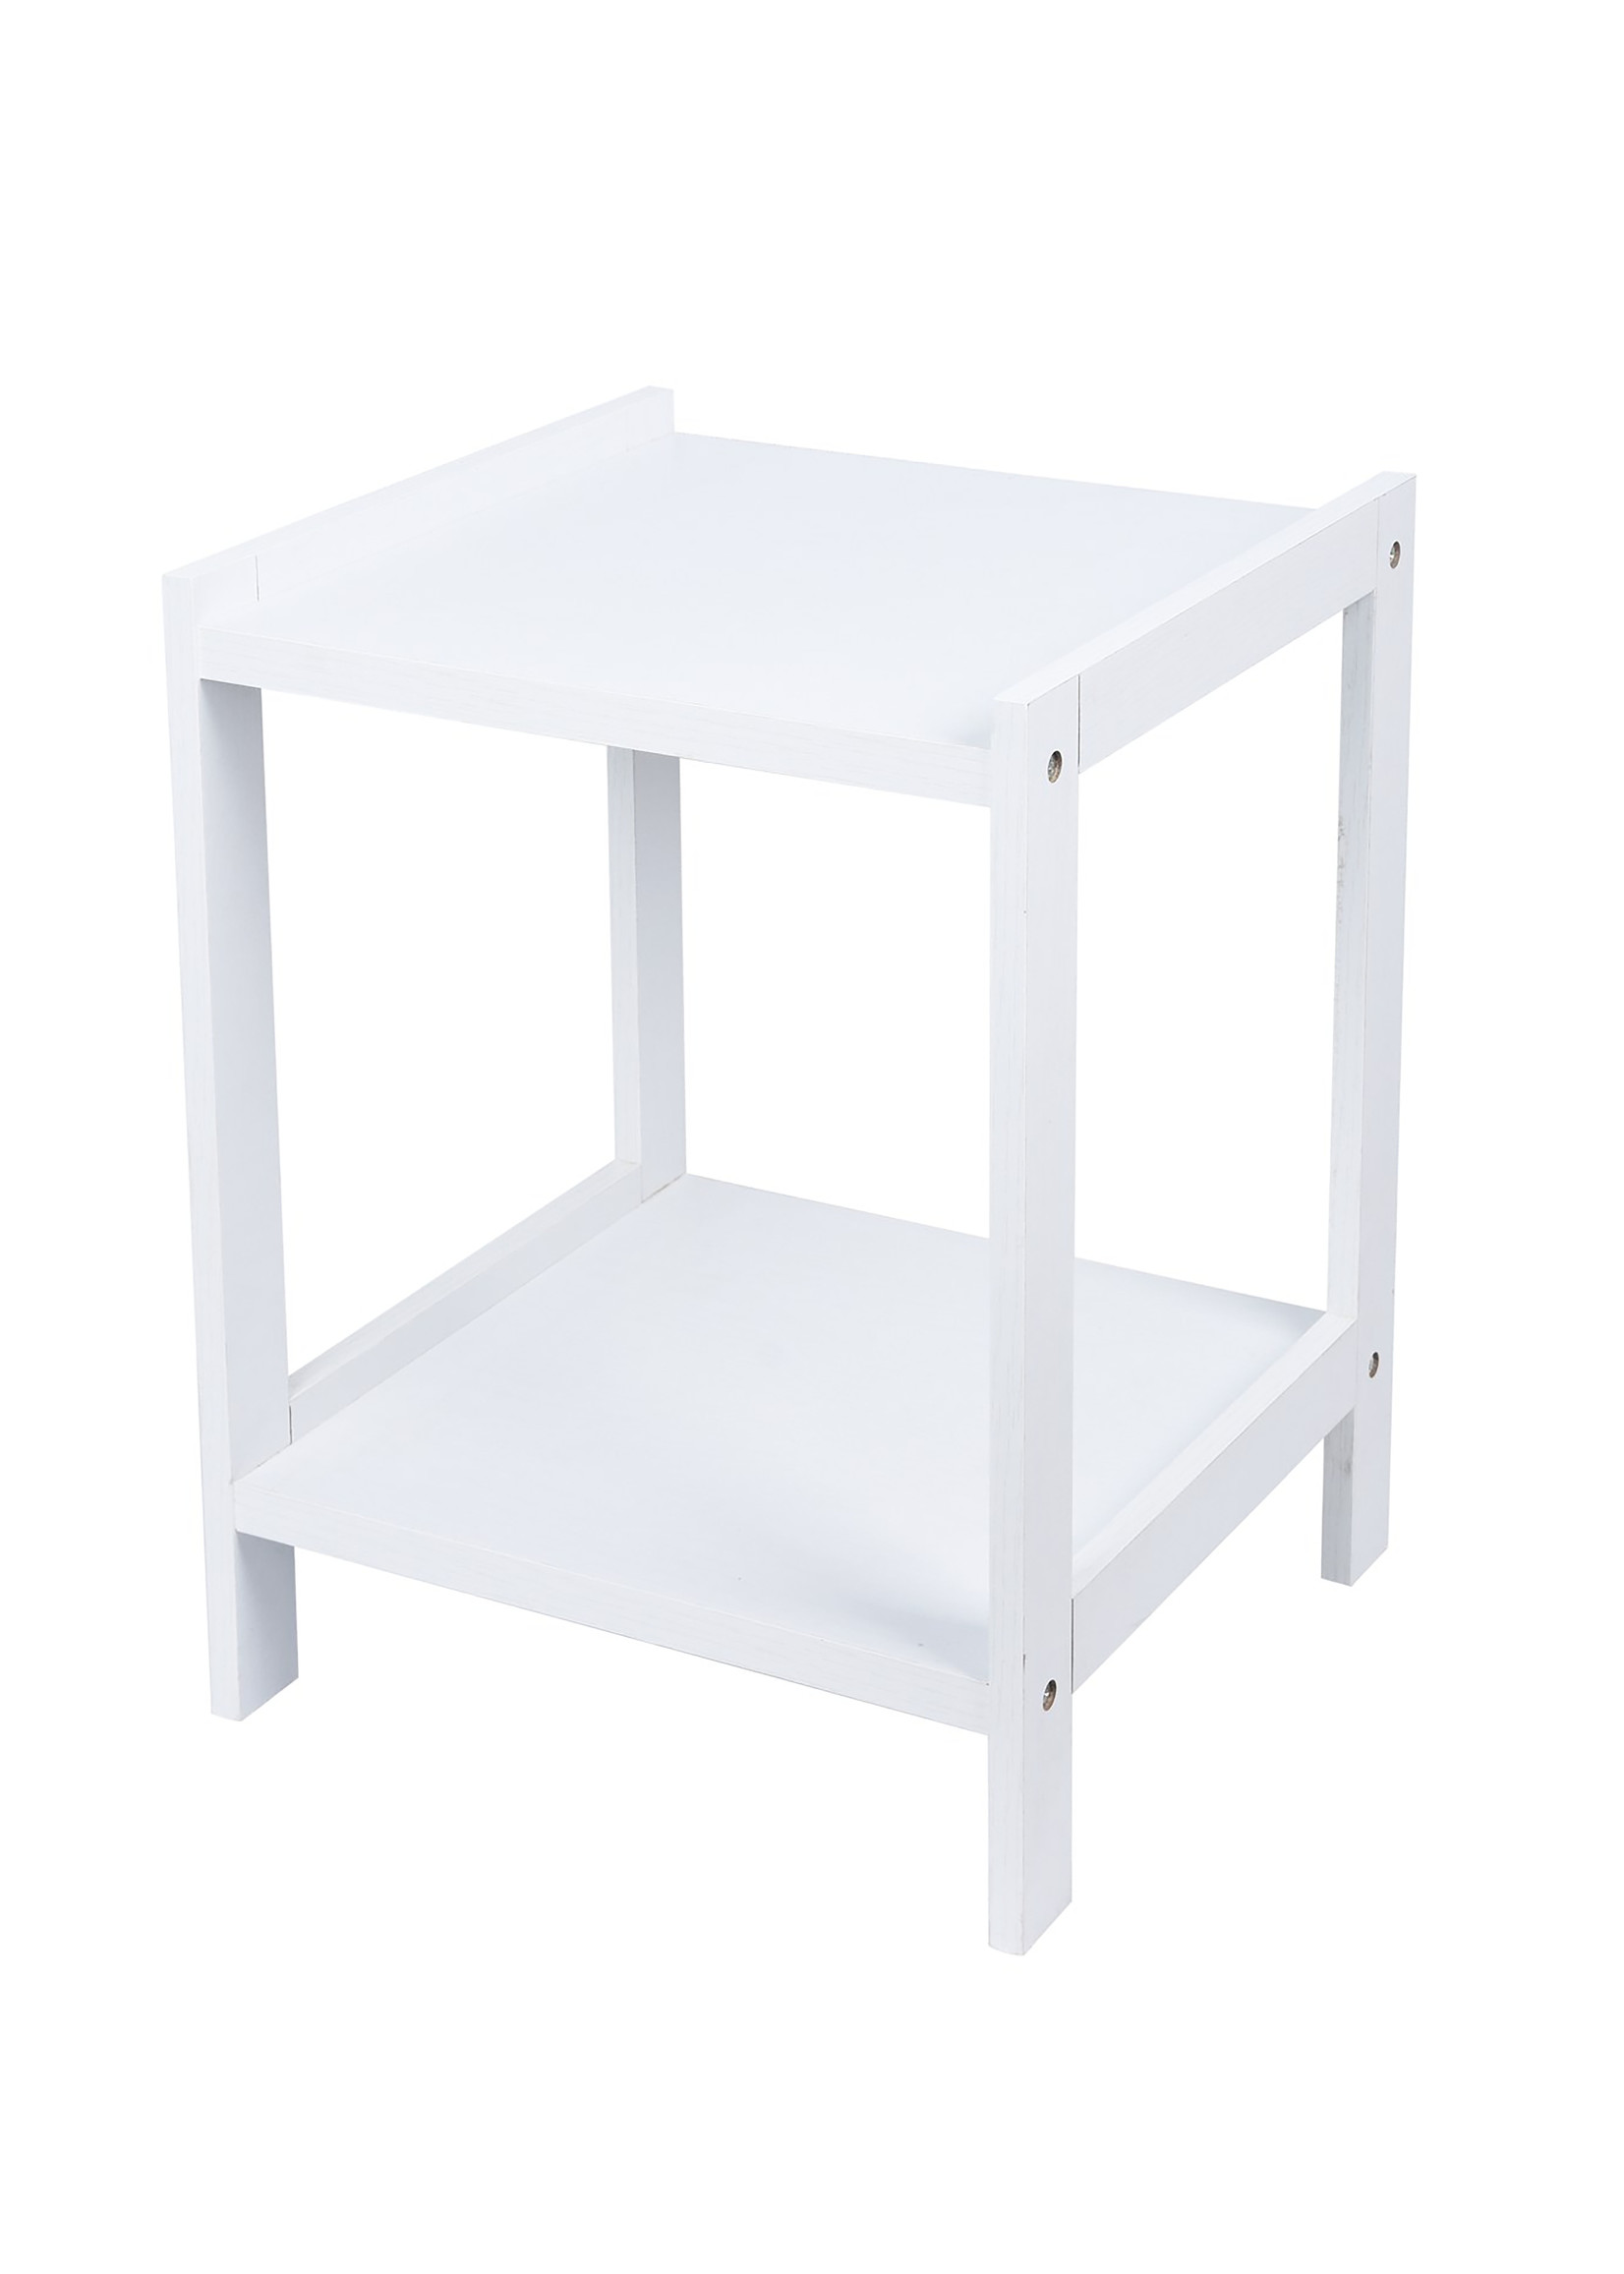 ITY INTERNATIONAL 2-Tier White MDF Table